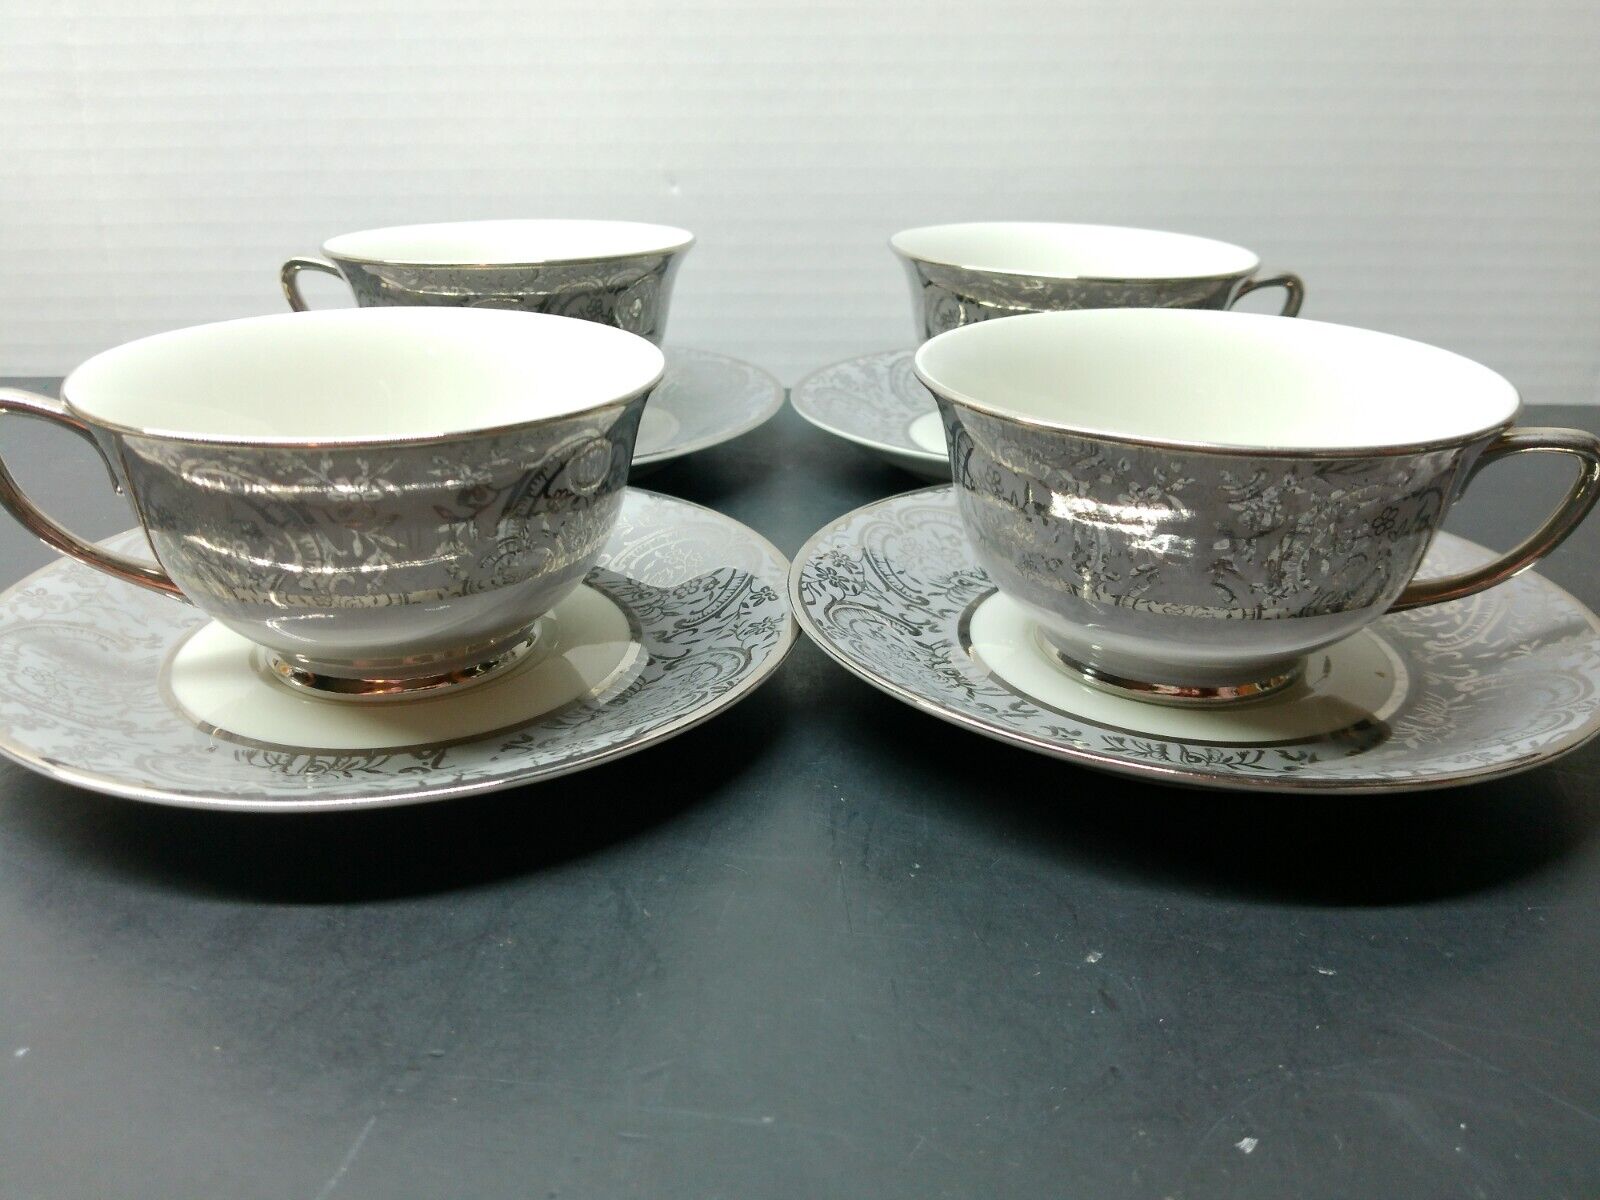 Vogue Silver Lace Cup & Saucer Set of 4